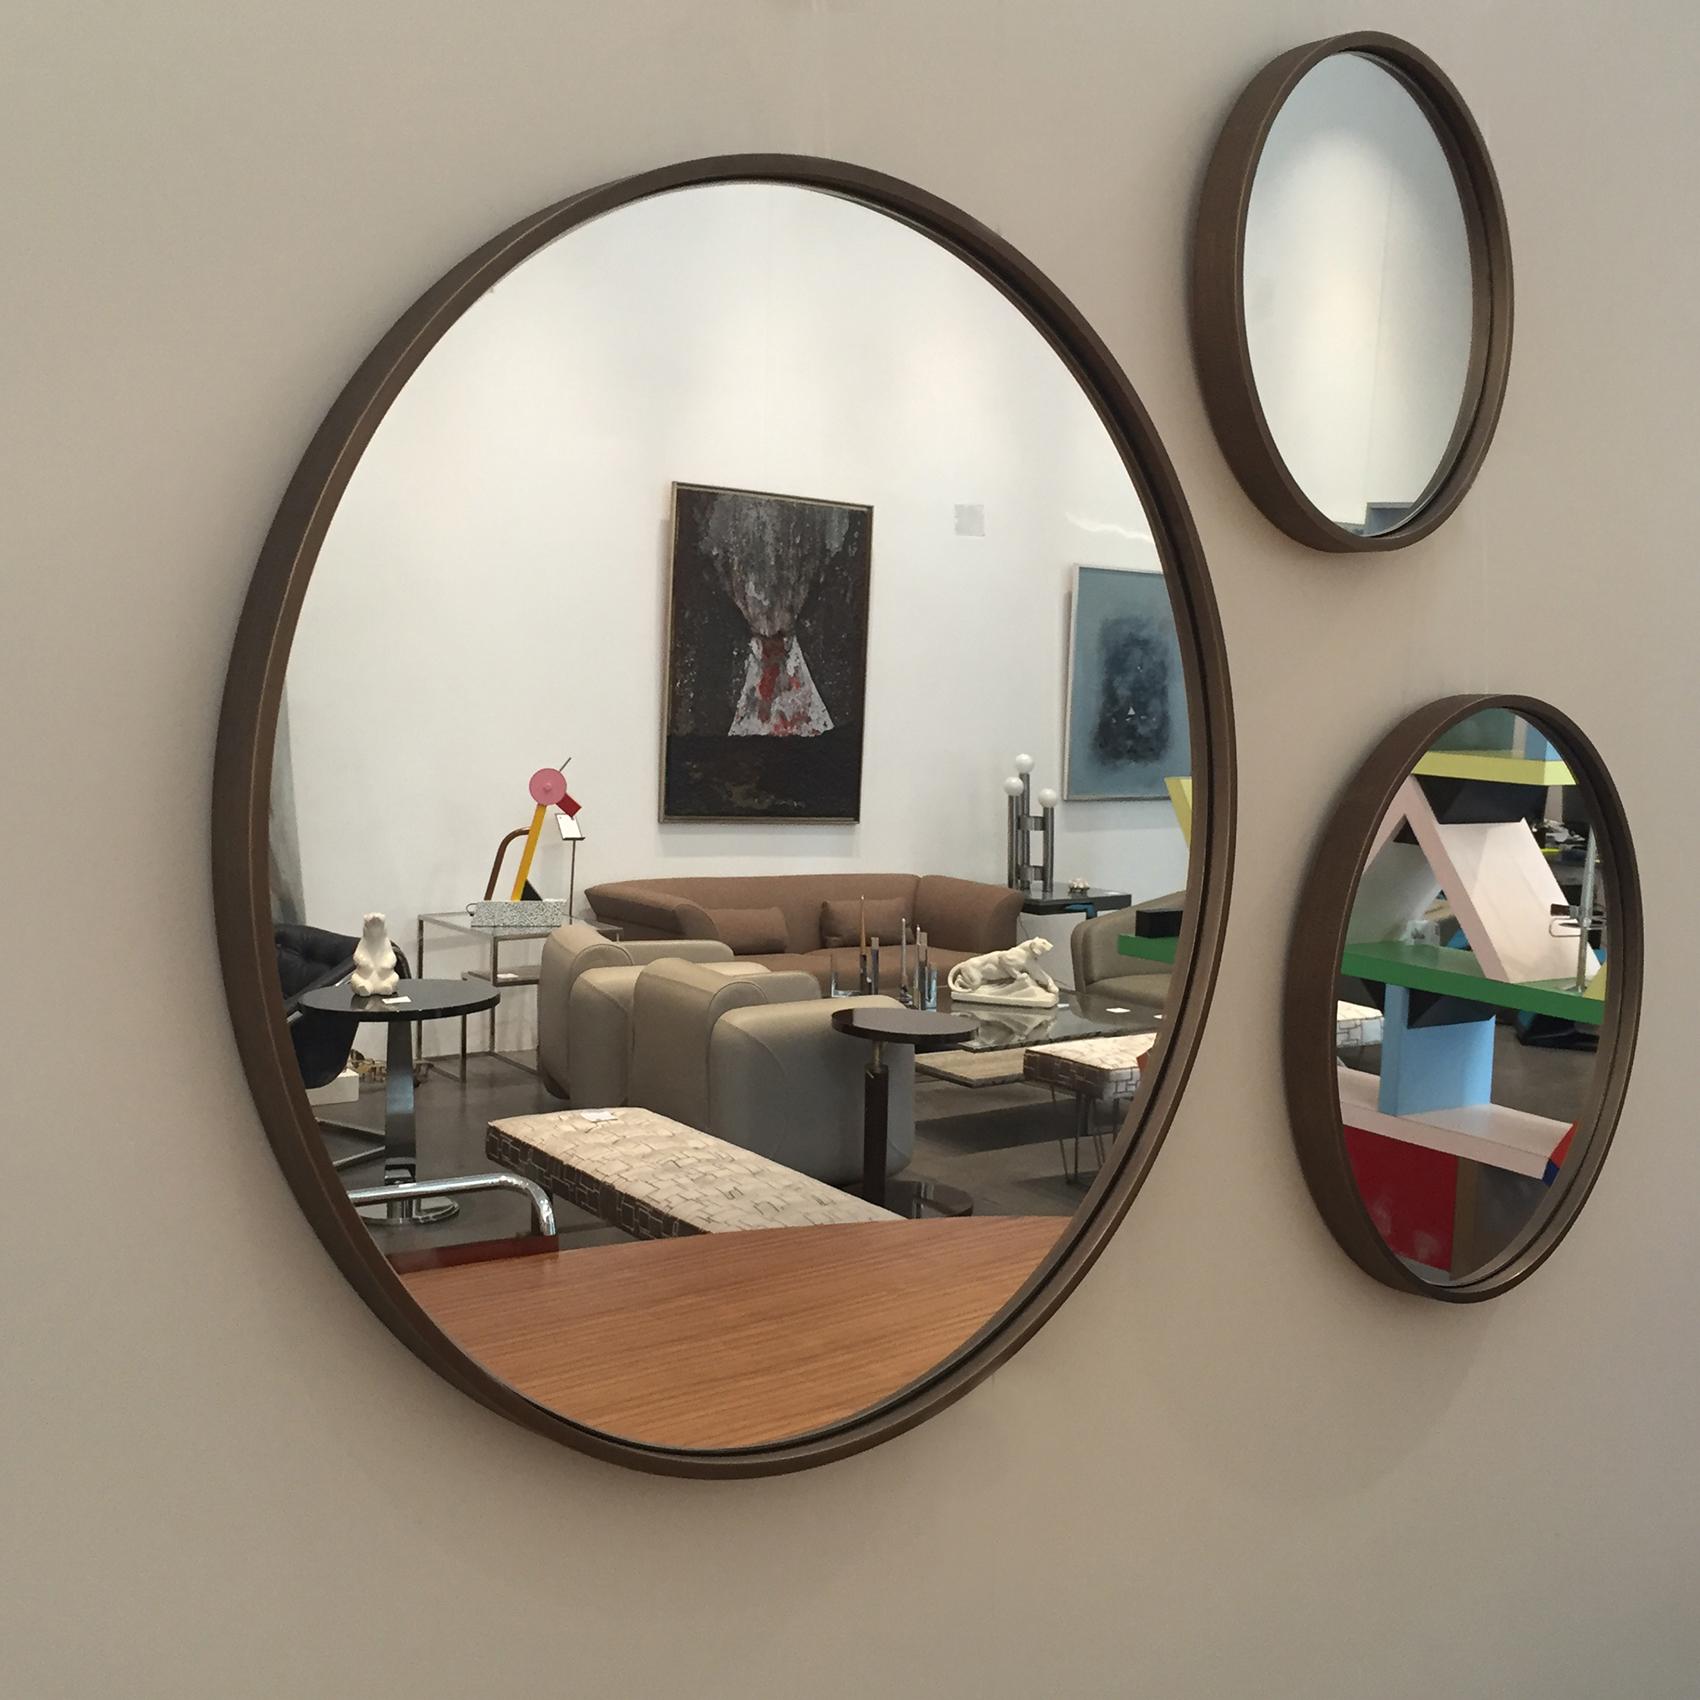 Small Orbit mirror from the three circular mirrors series, hanging without hierarchy, 
can go in any realm with their simplicity and elegance.

Dimensions of the three circular mirrors:
Dim S: Ø 30 cm x D 3 cm
Dim M: Ø 40 cm x D 3 cm
Dim L: Ø